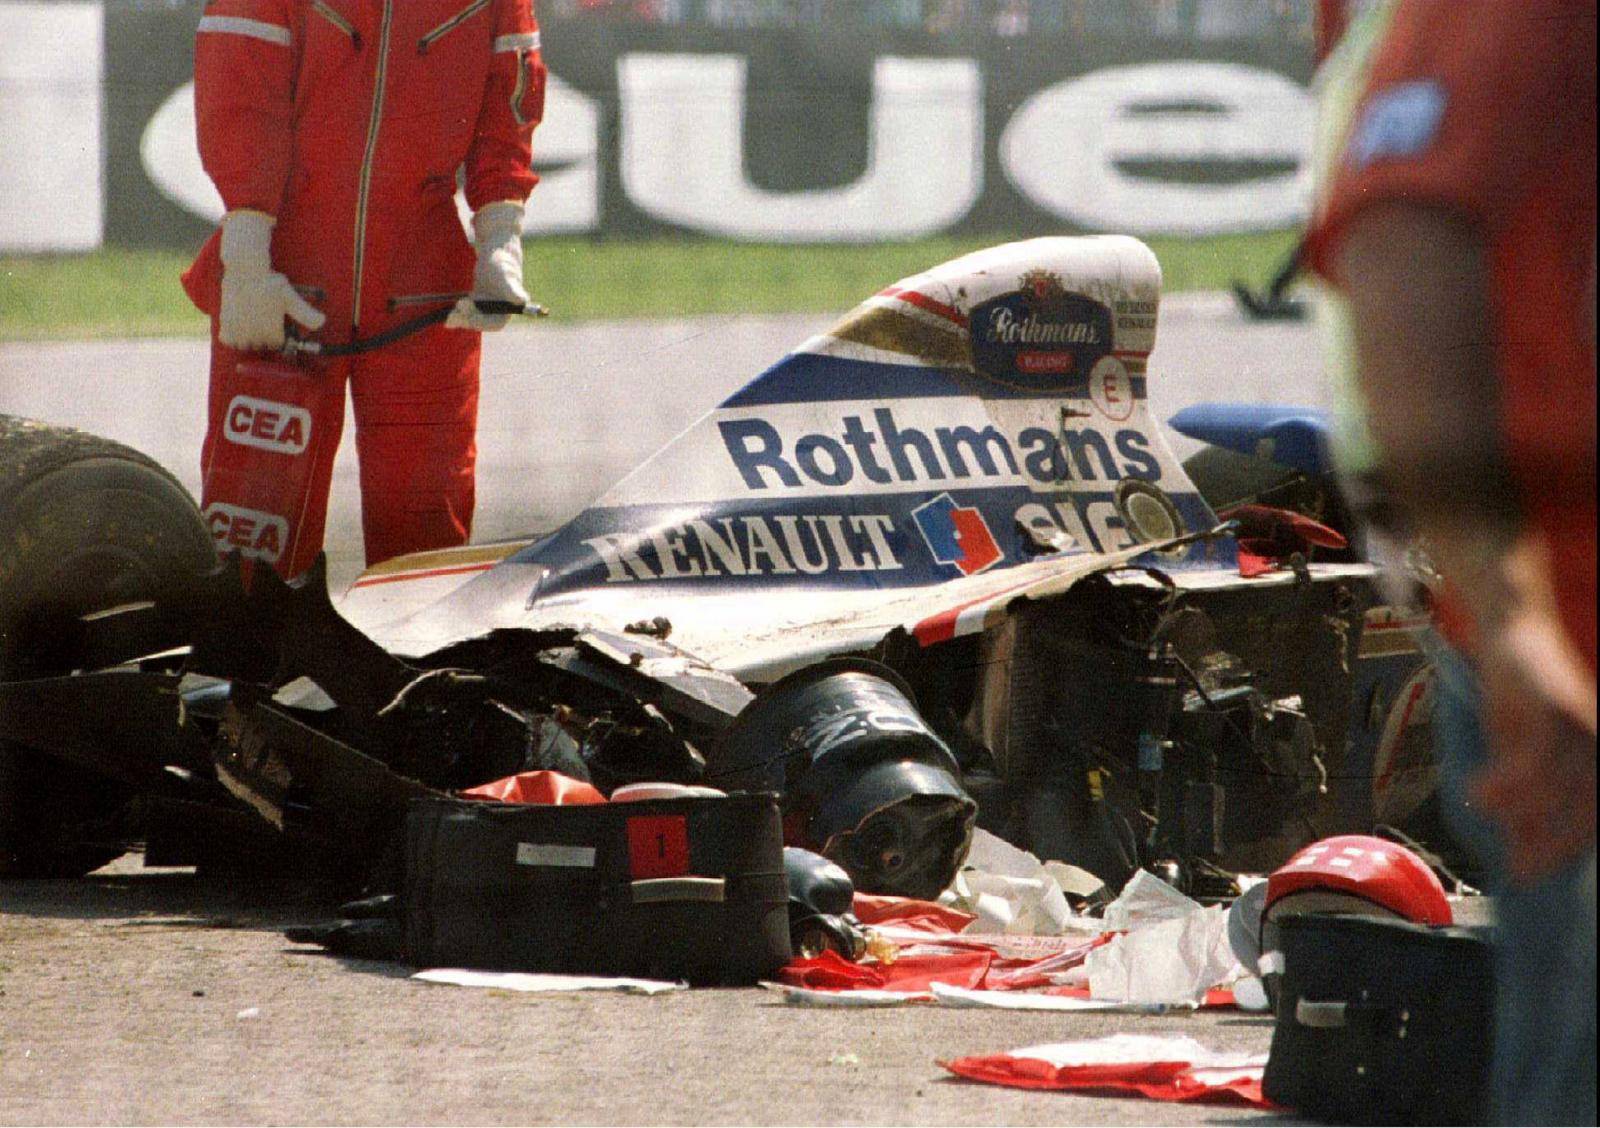 FILE PHOTO: Blood-stained medical equipment is seen surrounding Senna's Williams Renault car in Imola